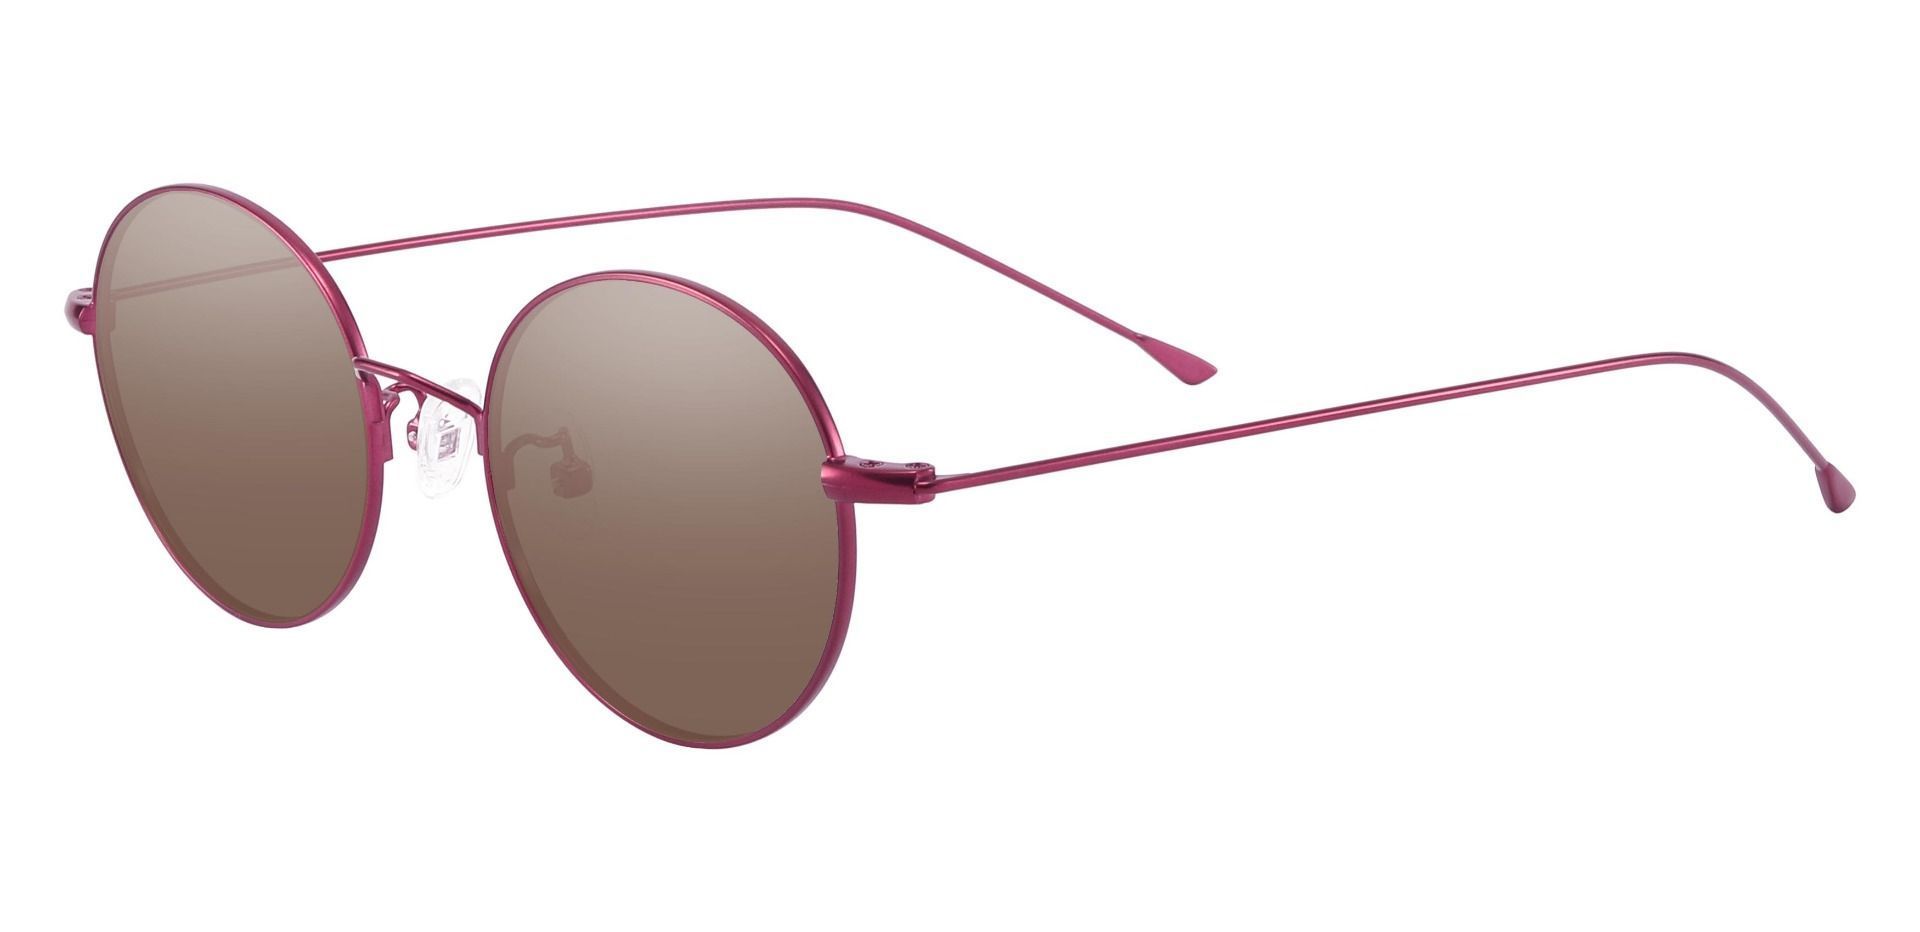 Arden Round Non-Rx Sunglasses - Purple Frame With Brown Lenses